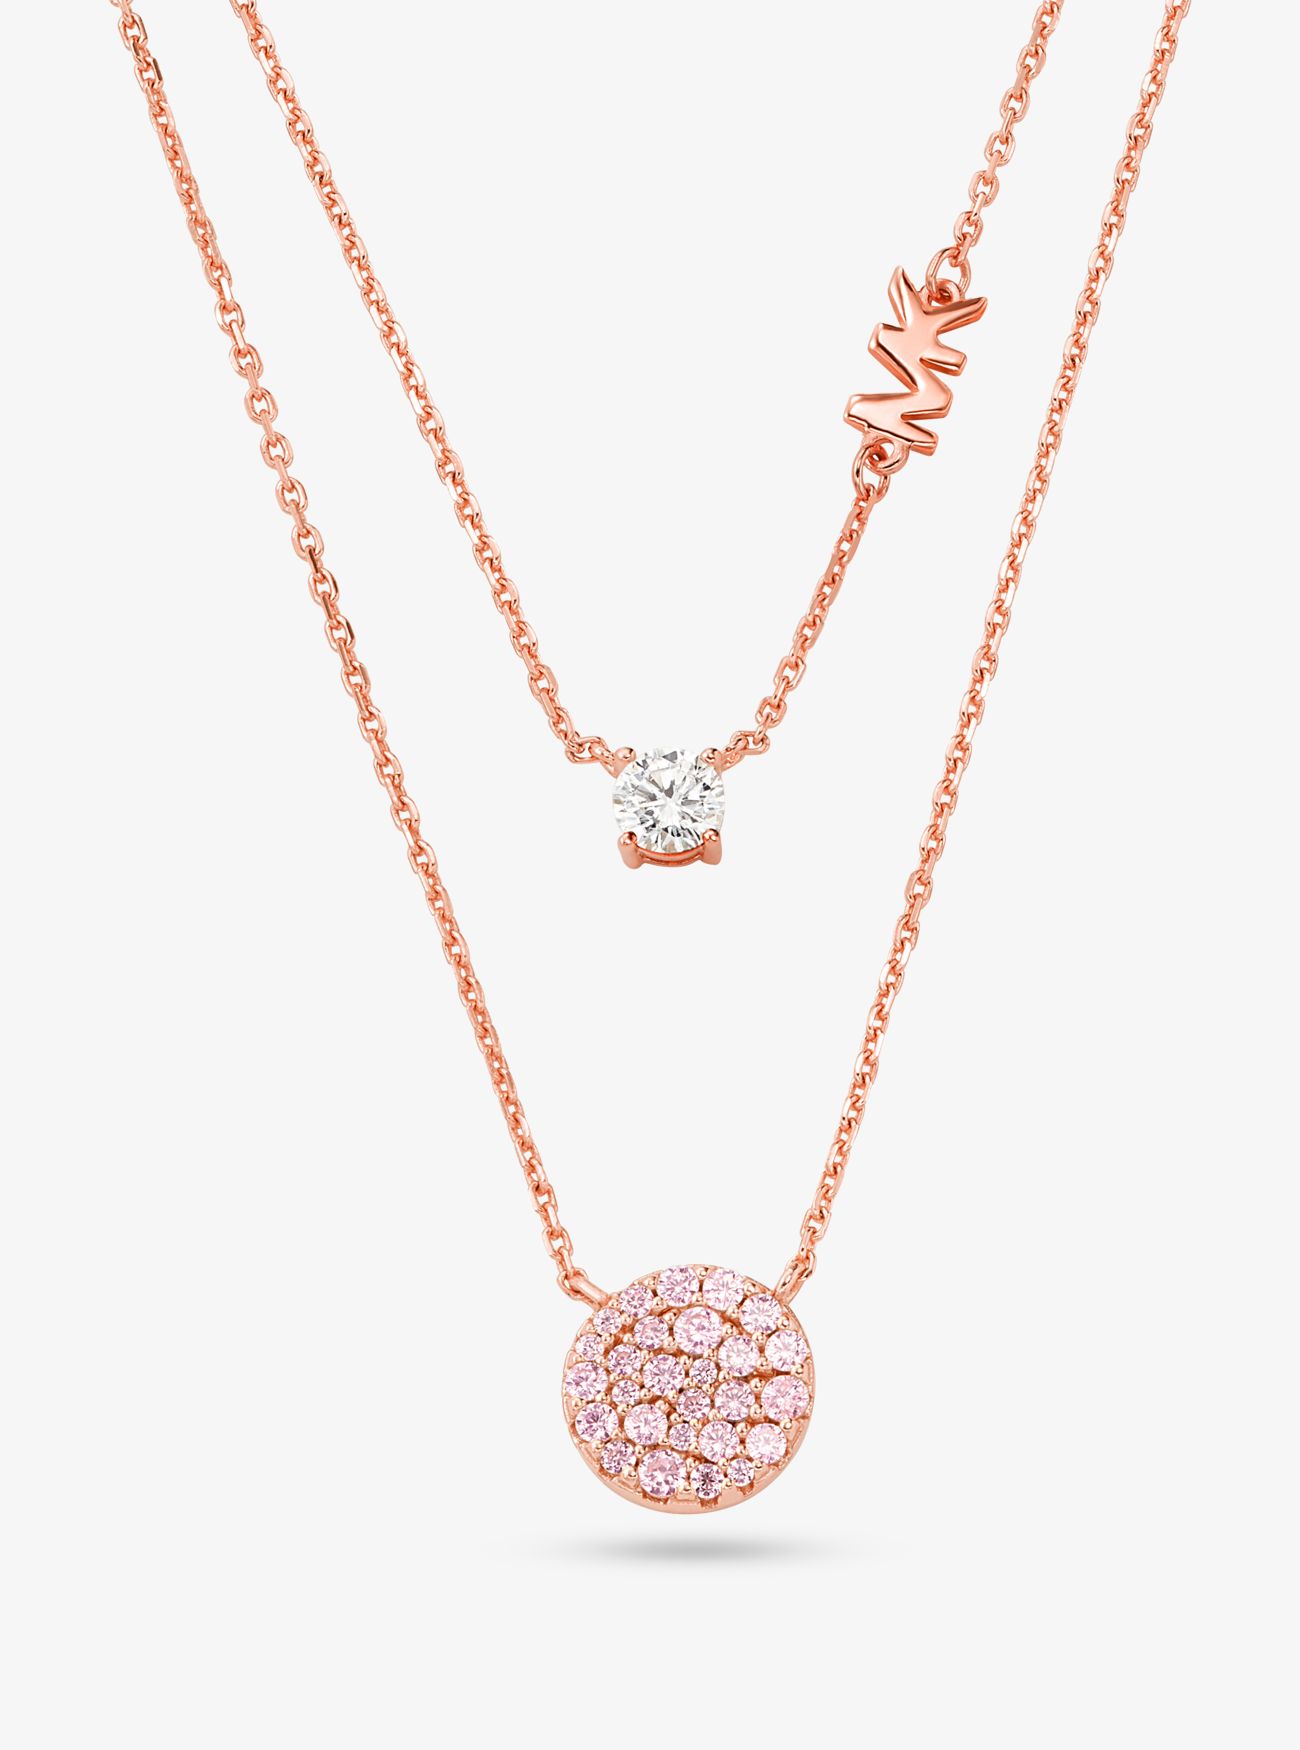 MK 14K Rose Gold-Plated Sterling Silver Pavé Disc Layering Necklace - Rose Gold - Michael Kors